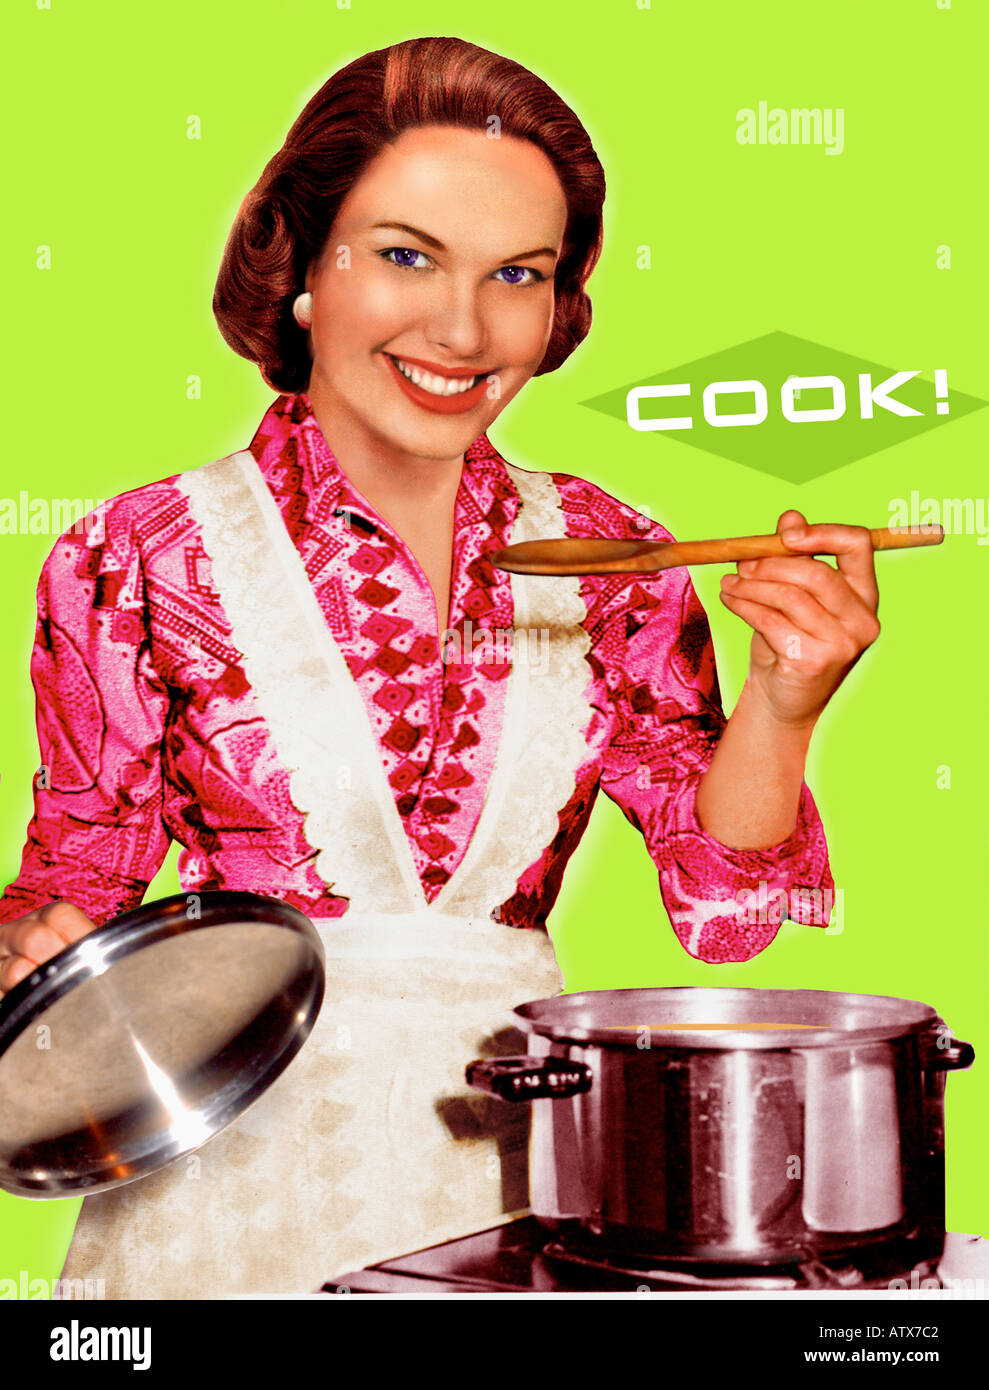 housewife COOKING Montage Illustration Stock Photo